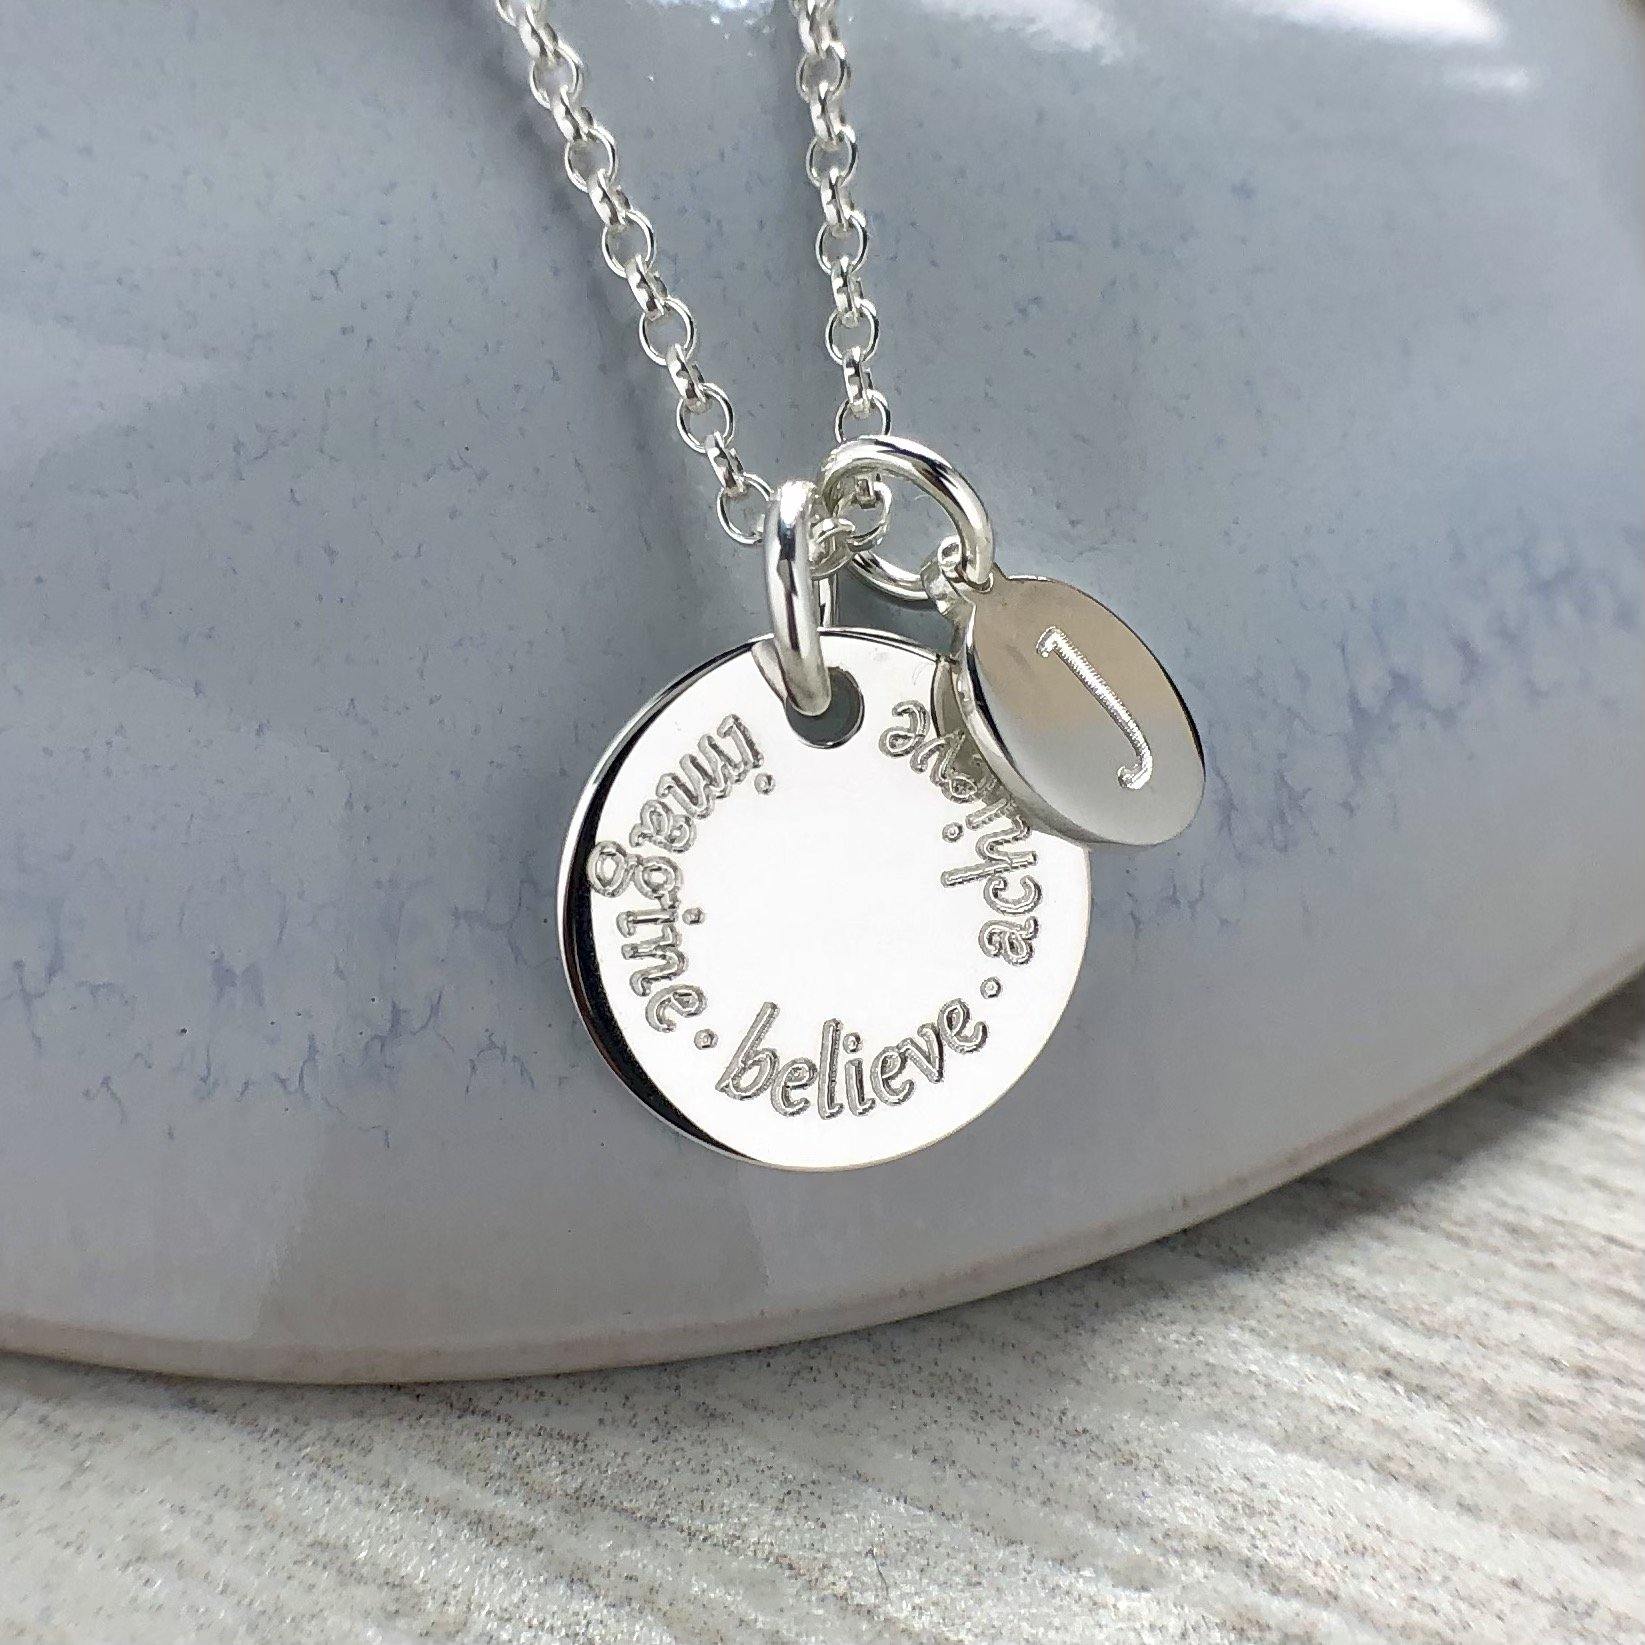 Engraved necklace, sterling silver, any names or words up to 25 letters plus initial charm